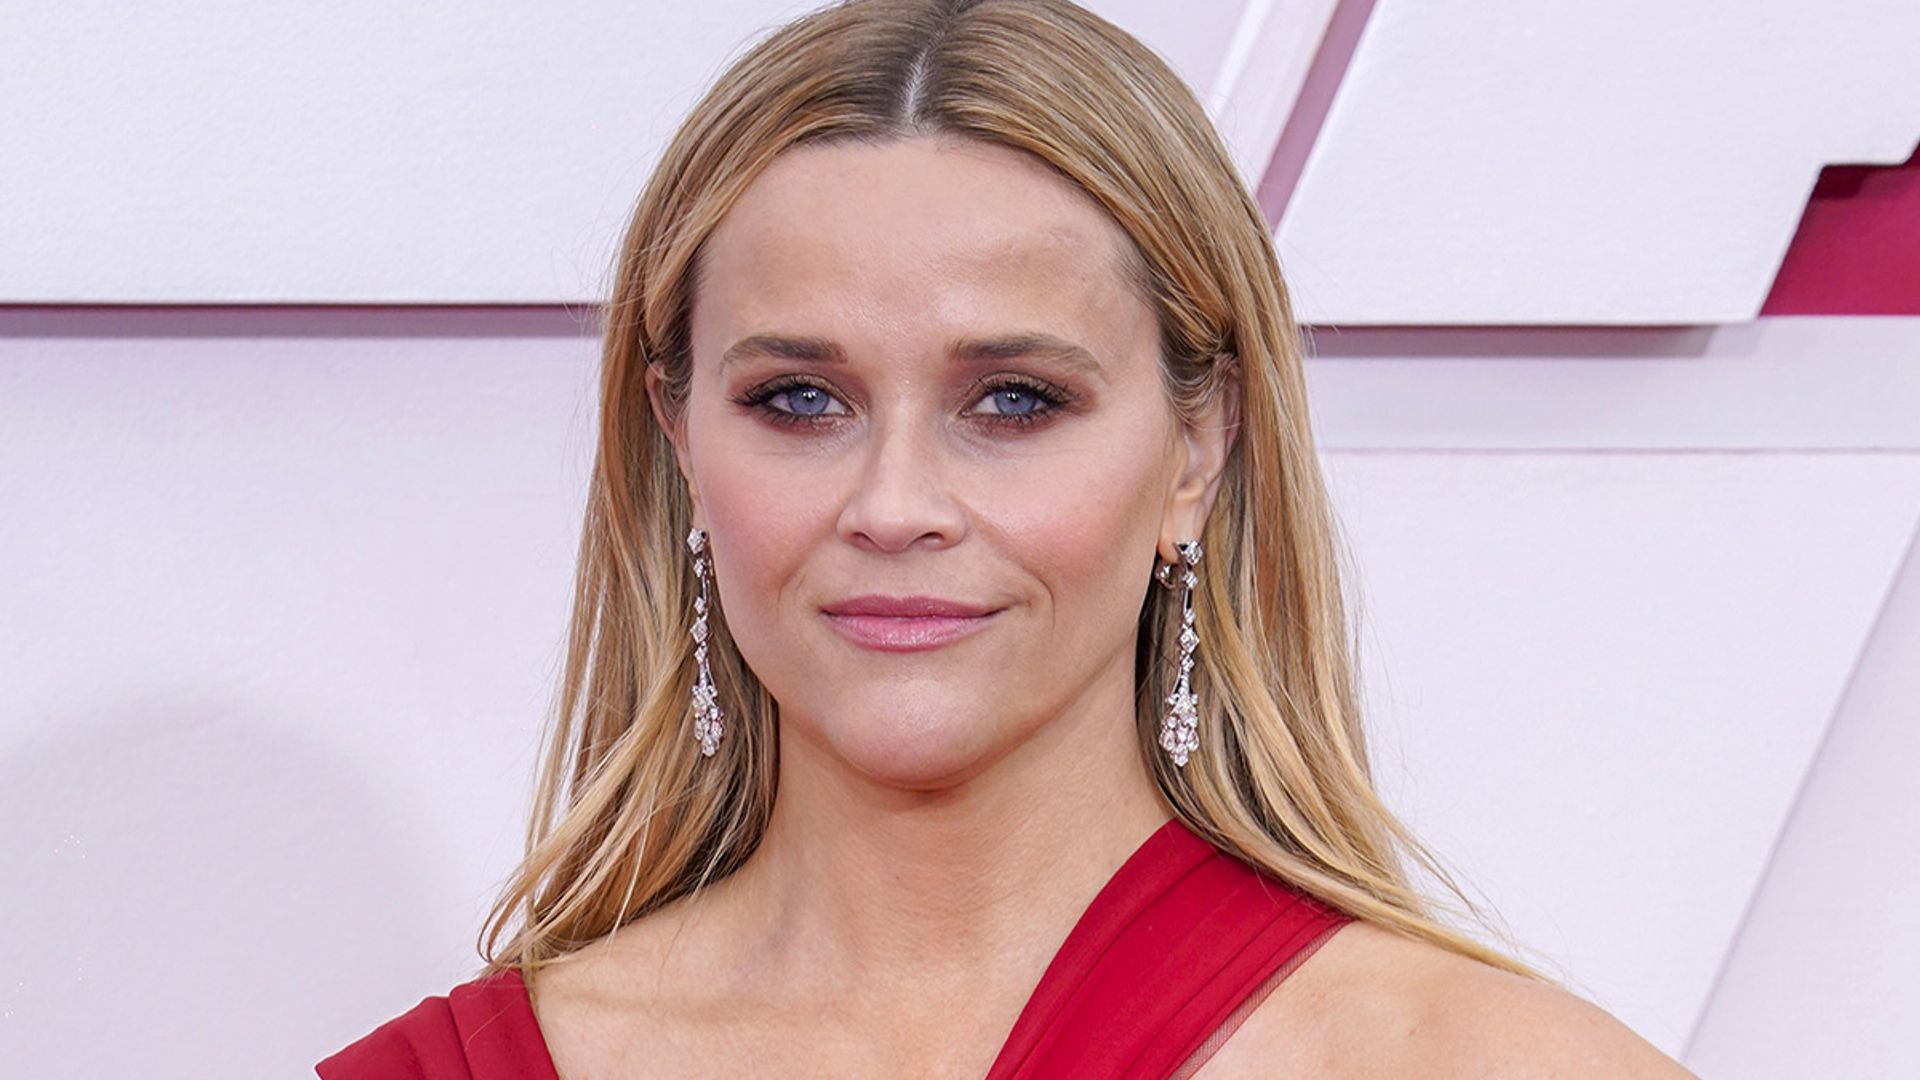 Reese Witherspoon shares heartbreak following loss of 'friend' Jean-Marc Vallée